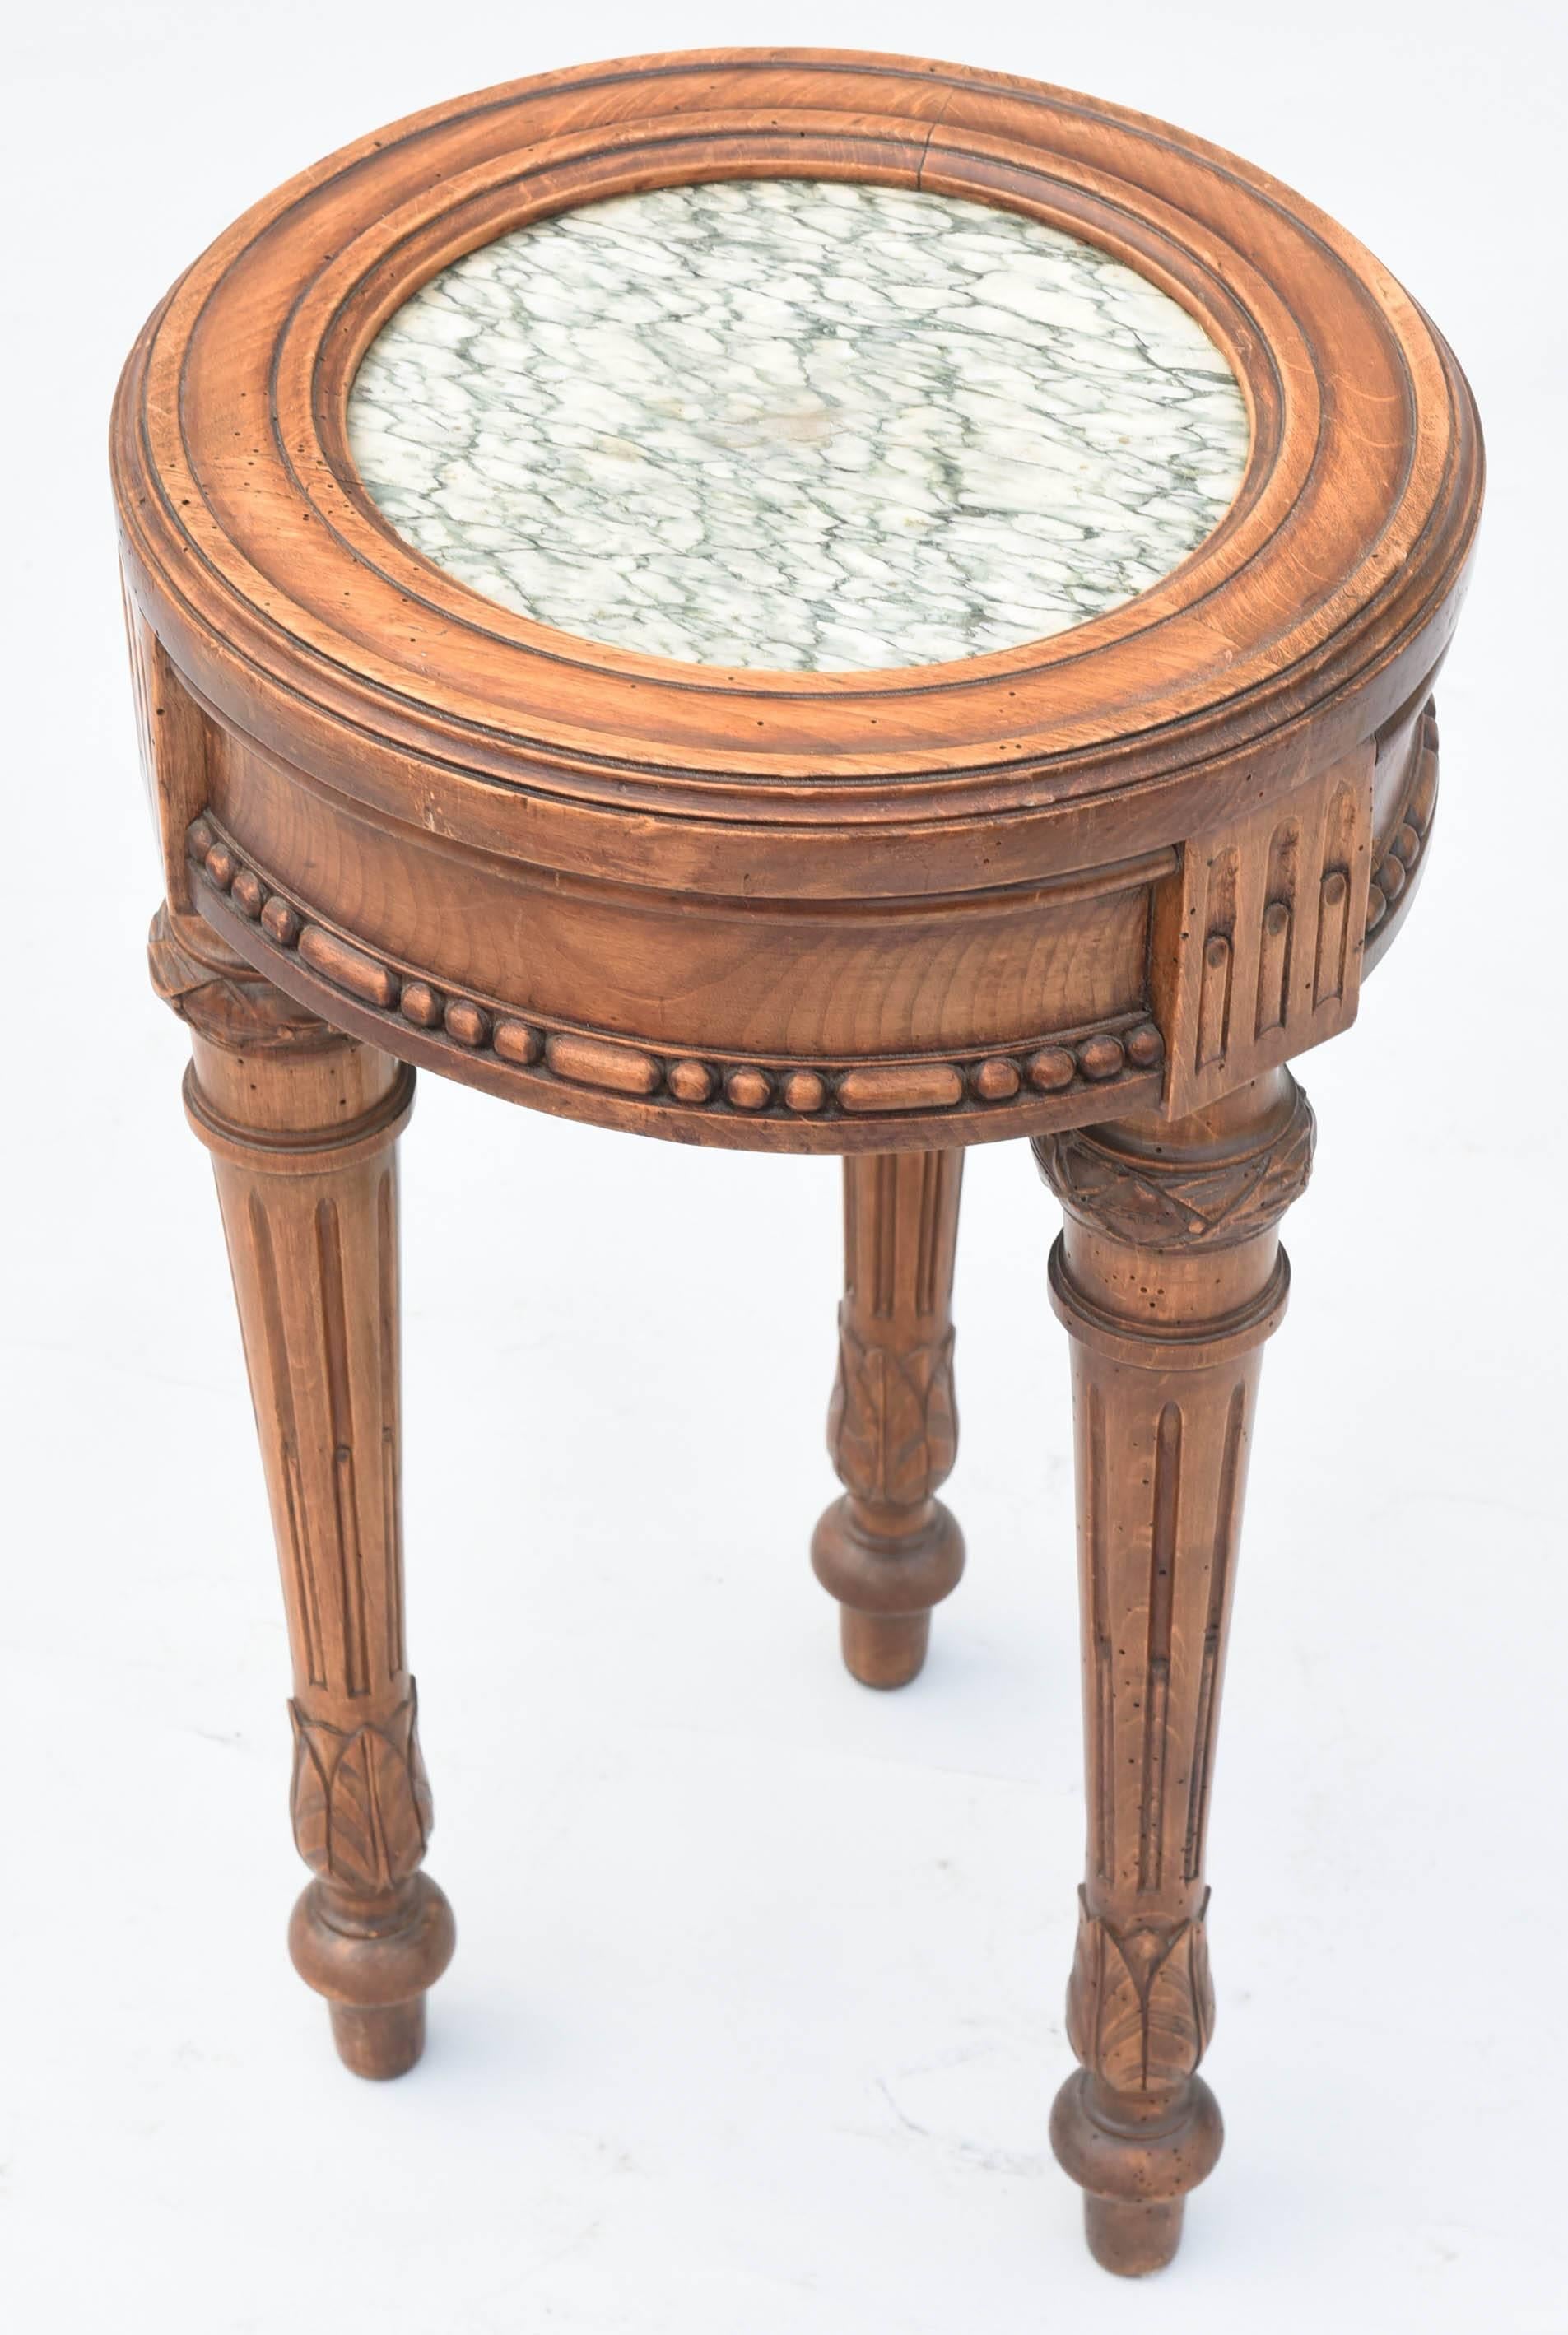 Well-carved Walnut 19th Century Accent Table with Marble Top 4